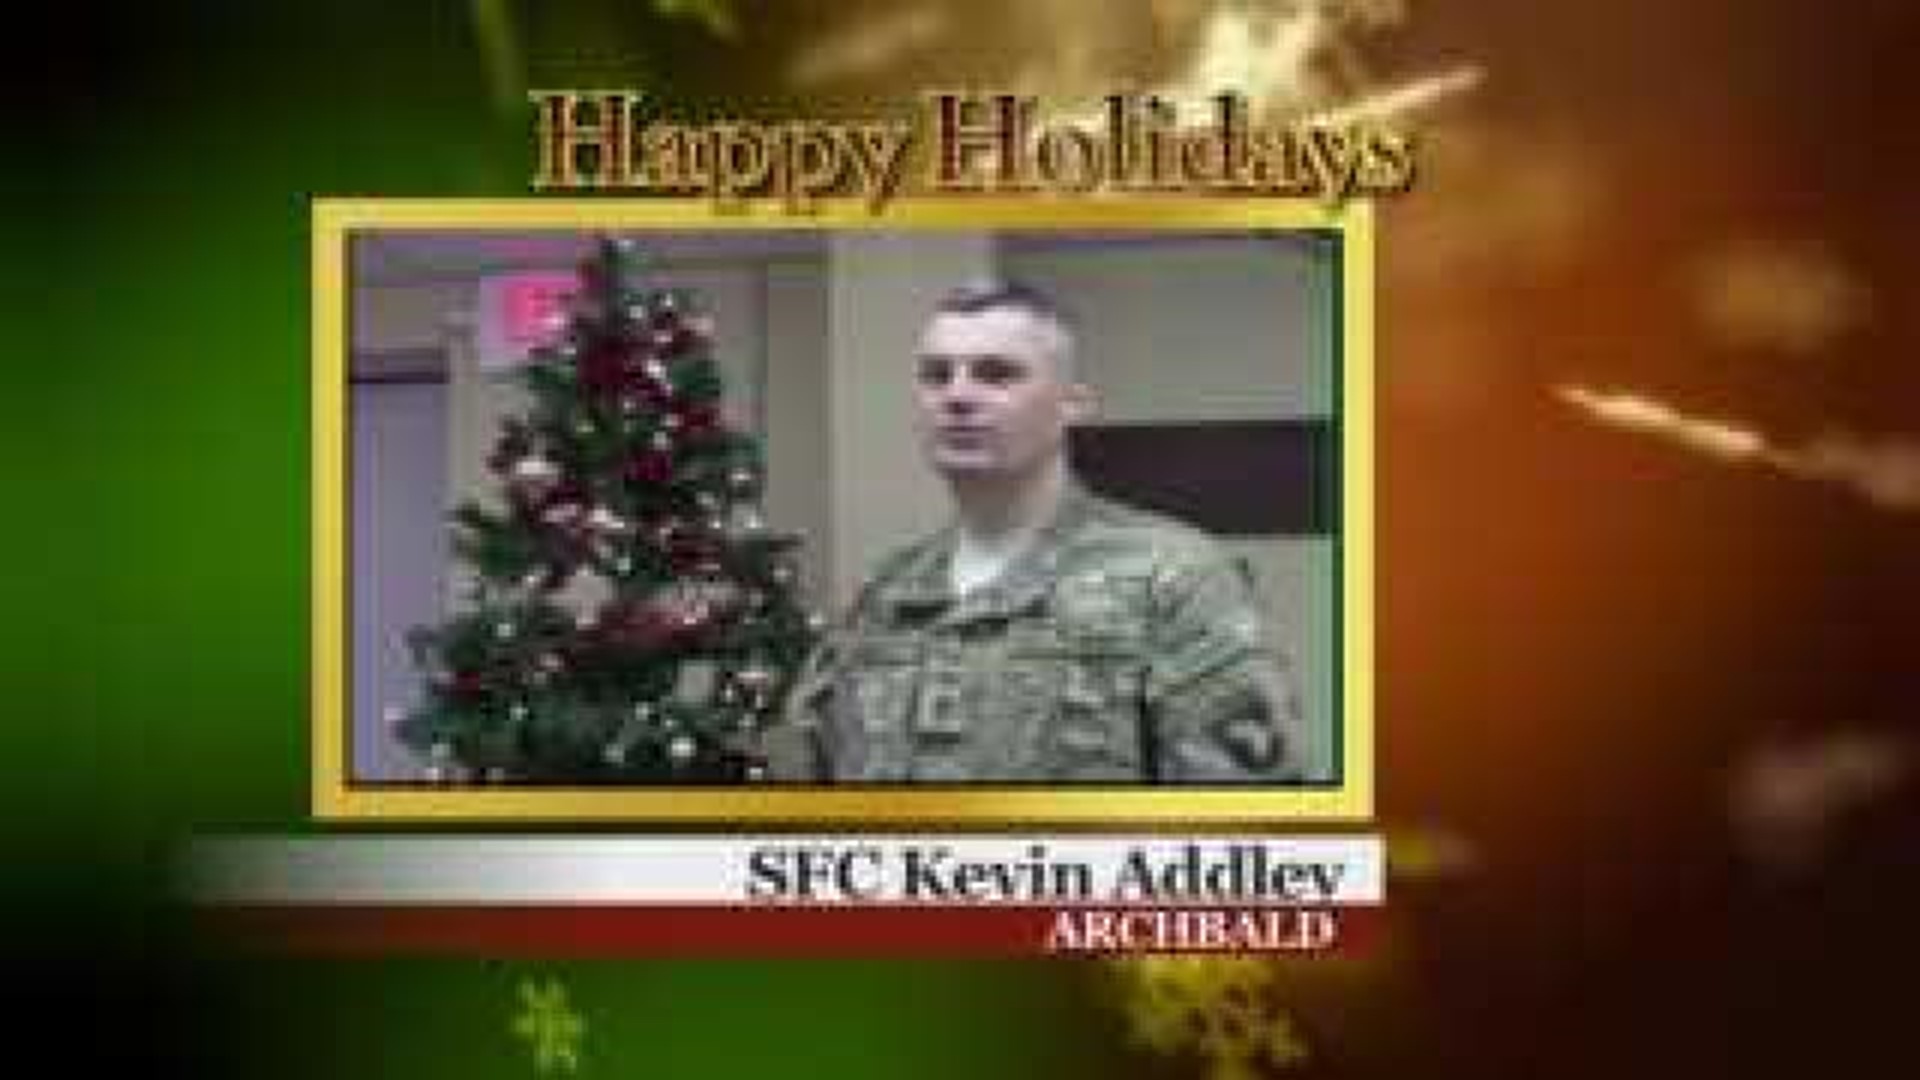 Military Greeting: SFC Kevin Addley